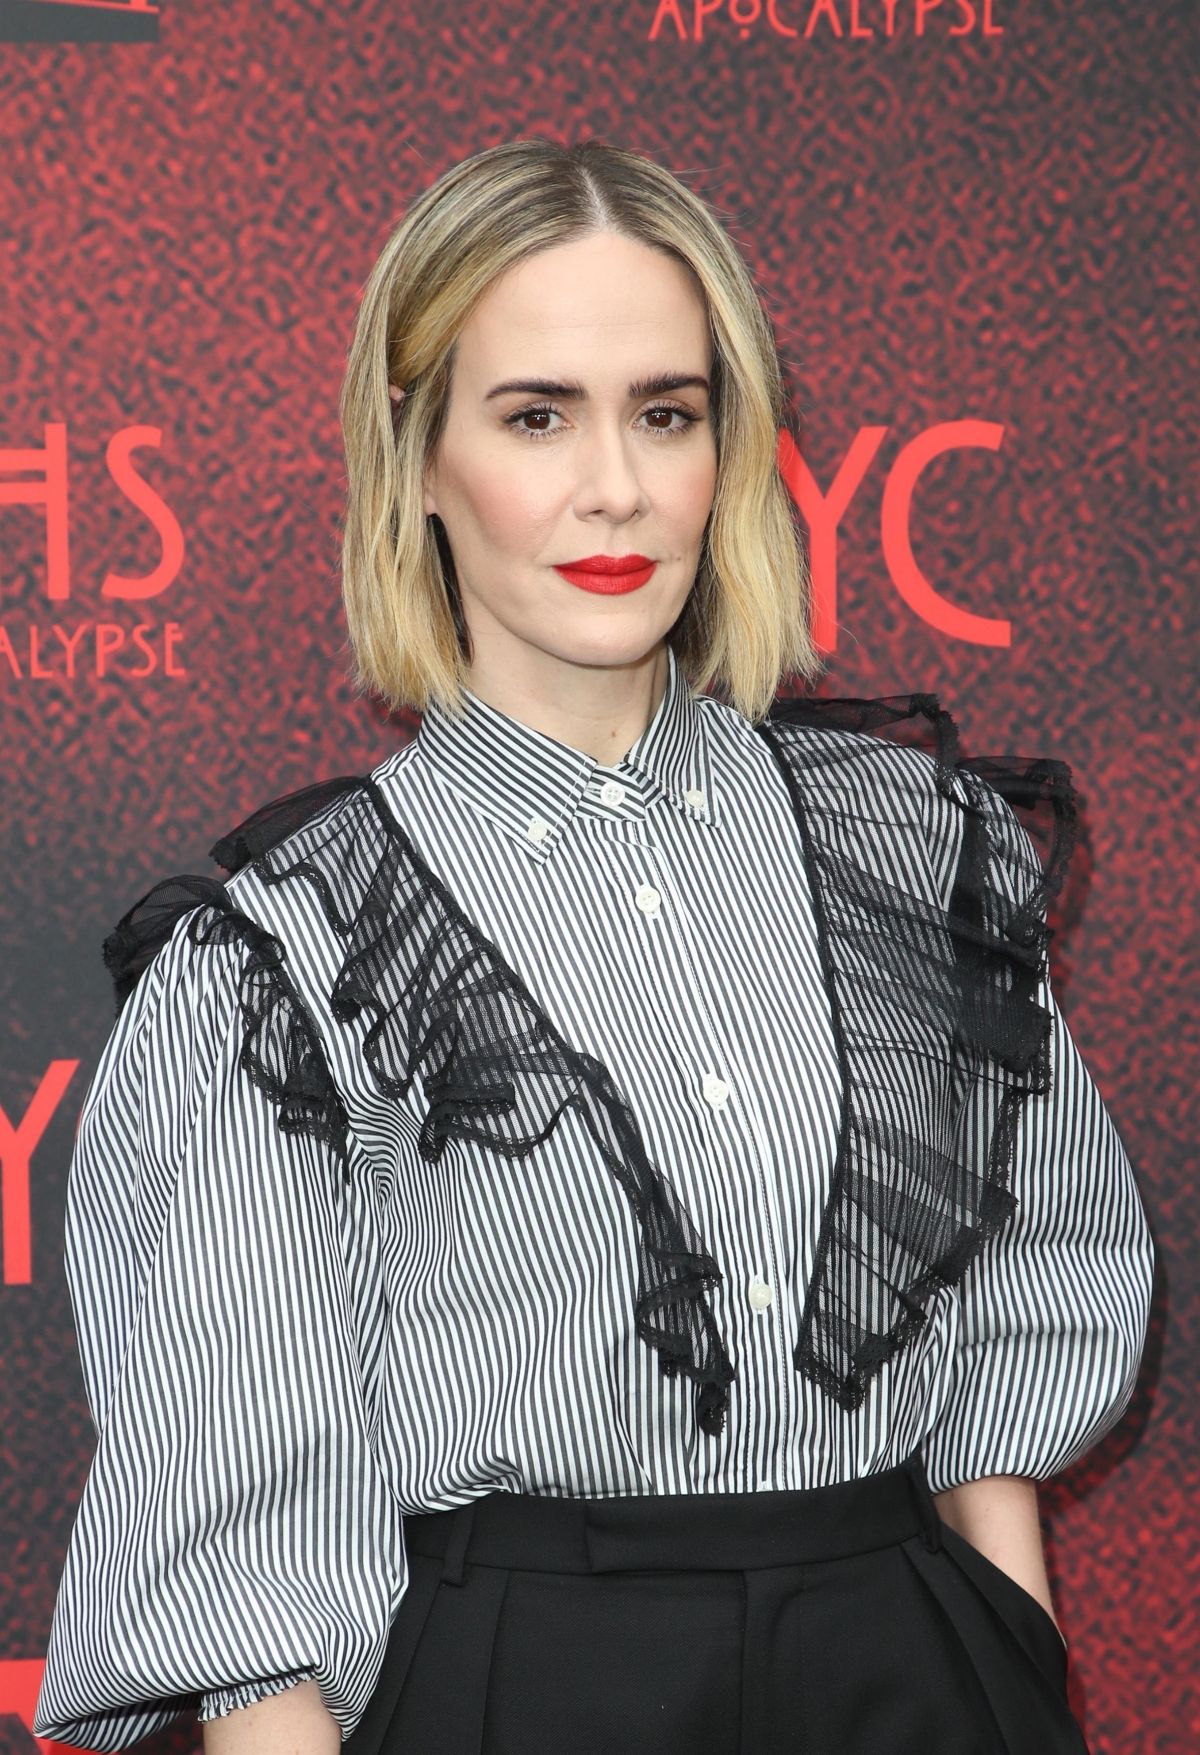 sarah-paulson-at-american-horror-story-apocalypse-fyc-event-in-los-angeles-05-18-2019-10.jpg